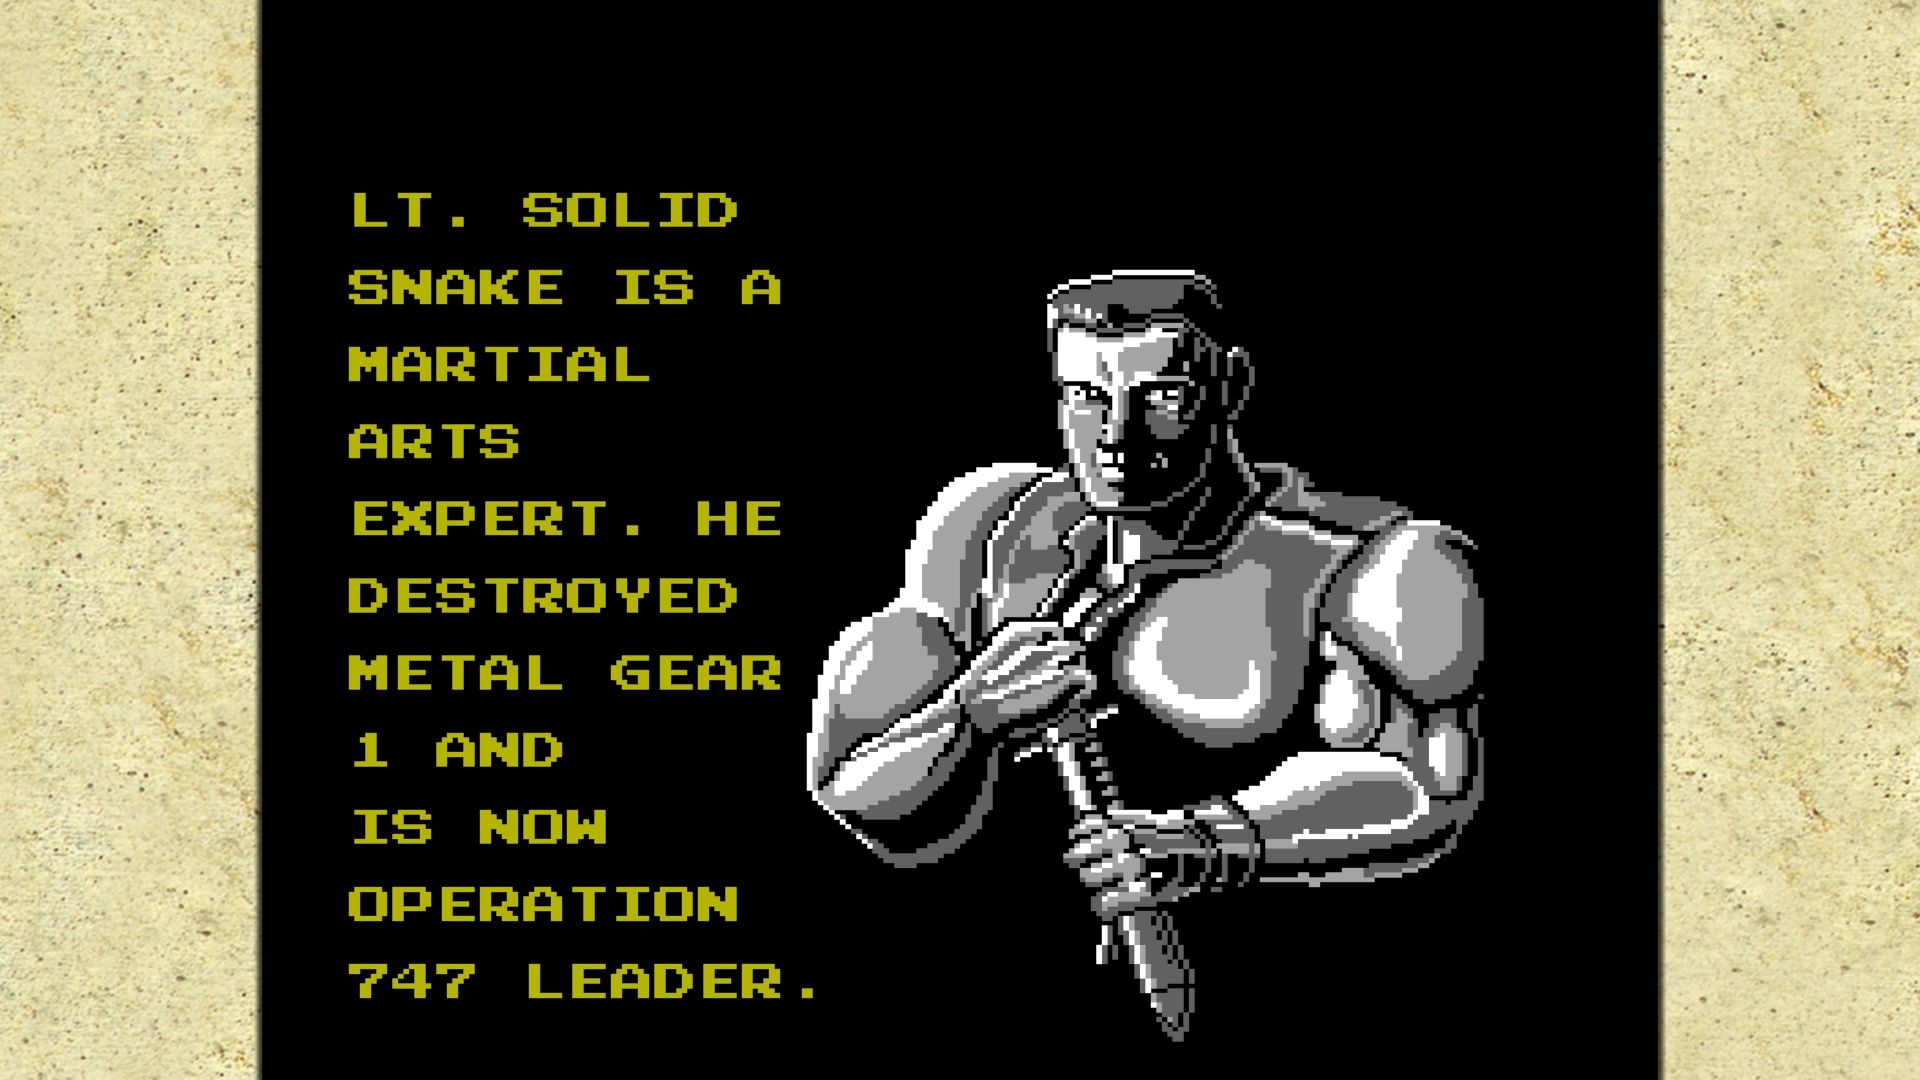 Screenshot from MGS: MCV1 version of Metal Gear for NES shows the beginning of the NES game describing the plot of the game with a gray version of Solid Snake who looks different then the MGS series.